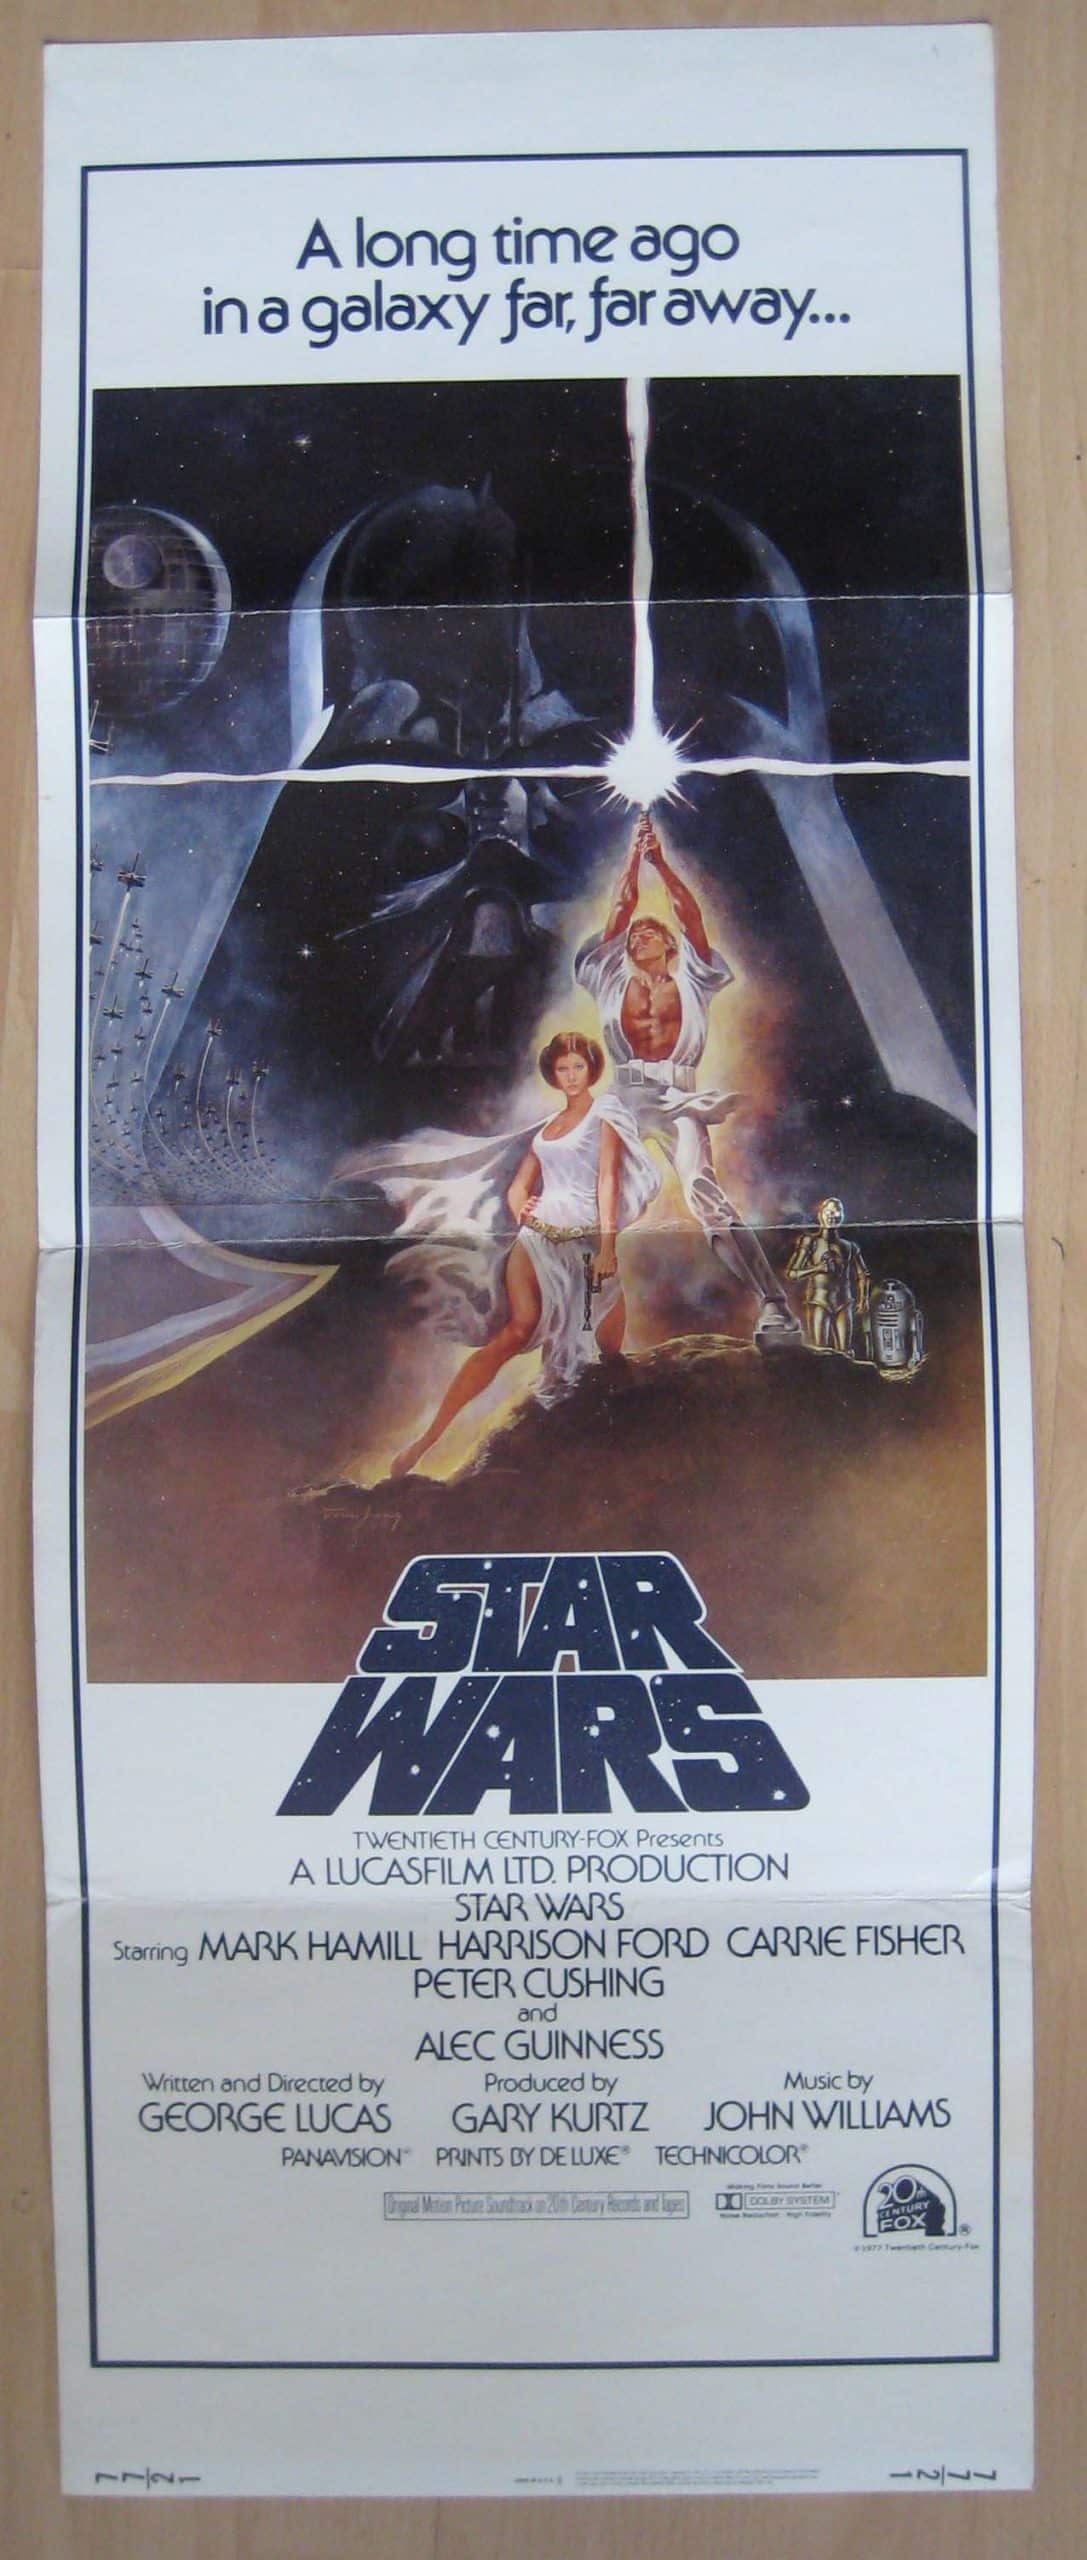 mt_ignore: STAR WARS POSTER